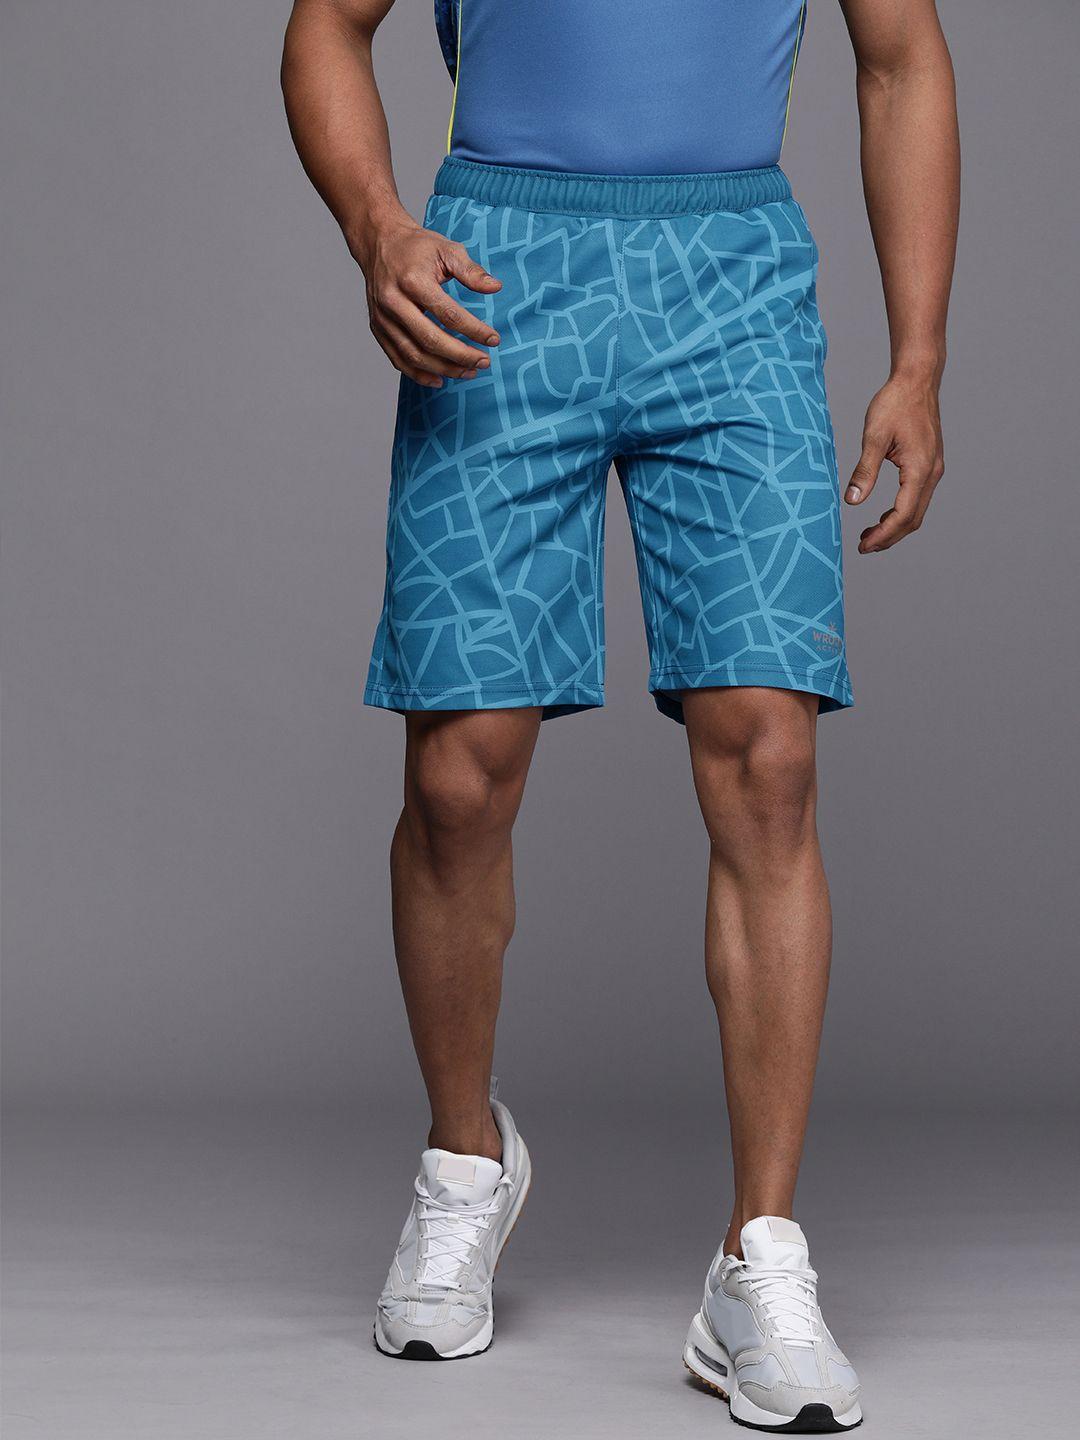 wrogn active men blue printed sports shorts